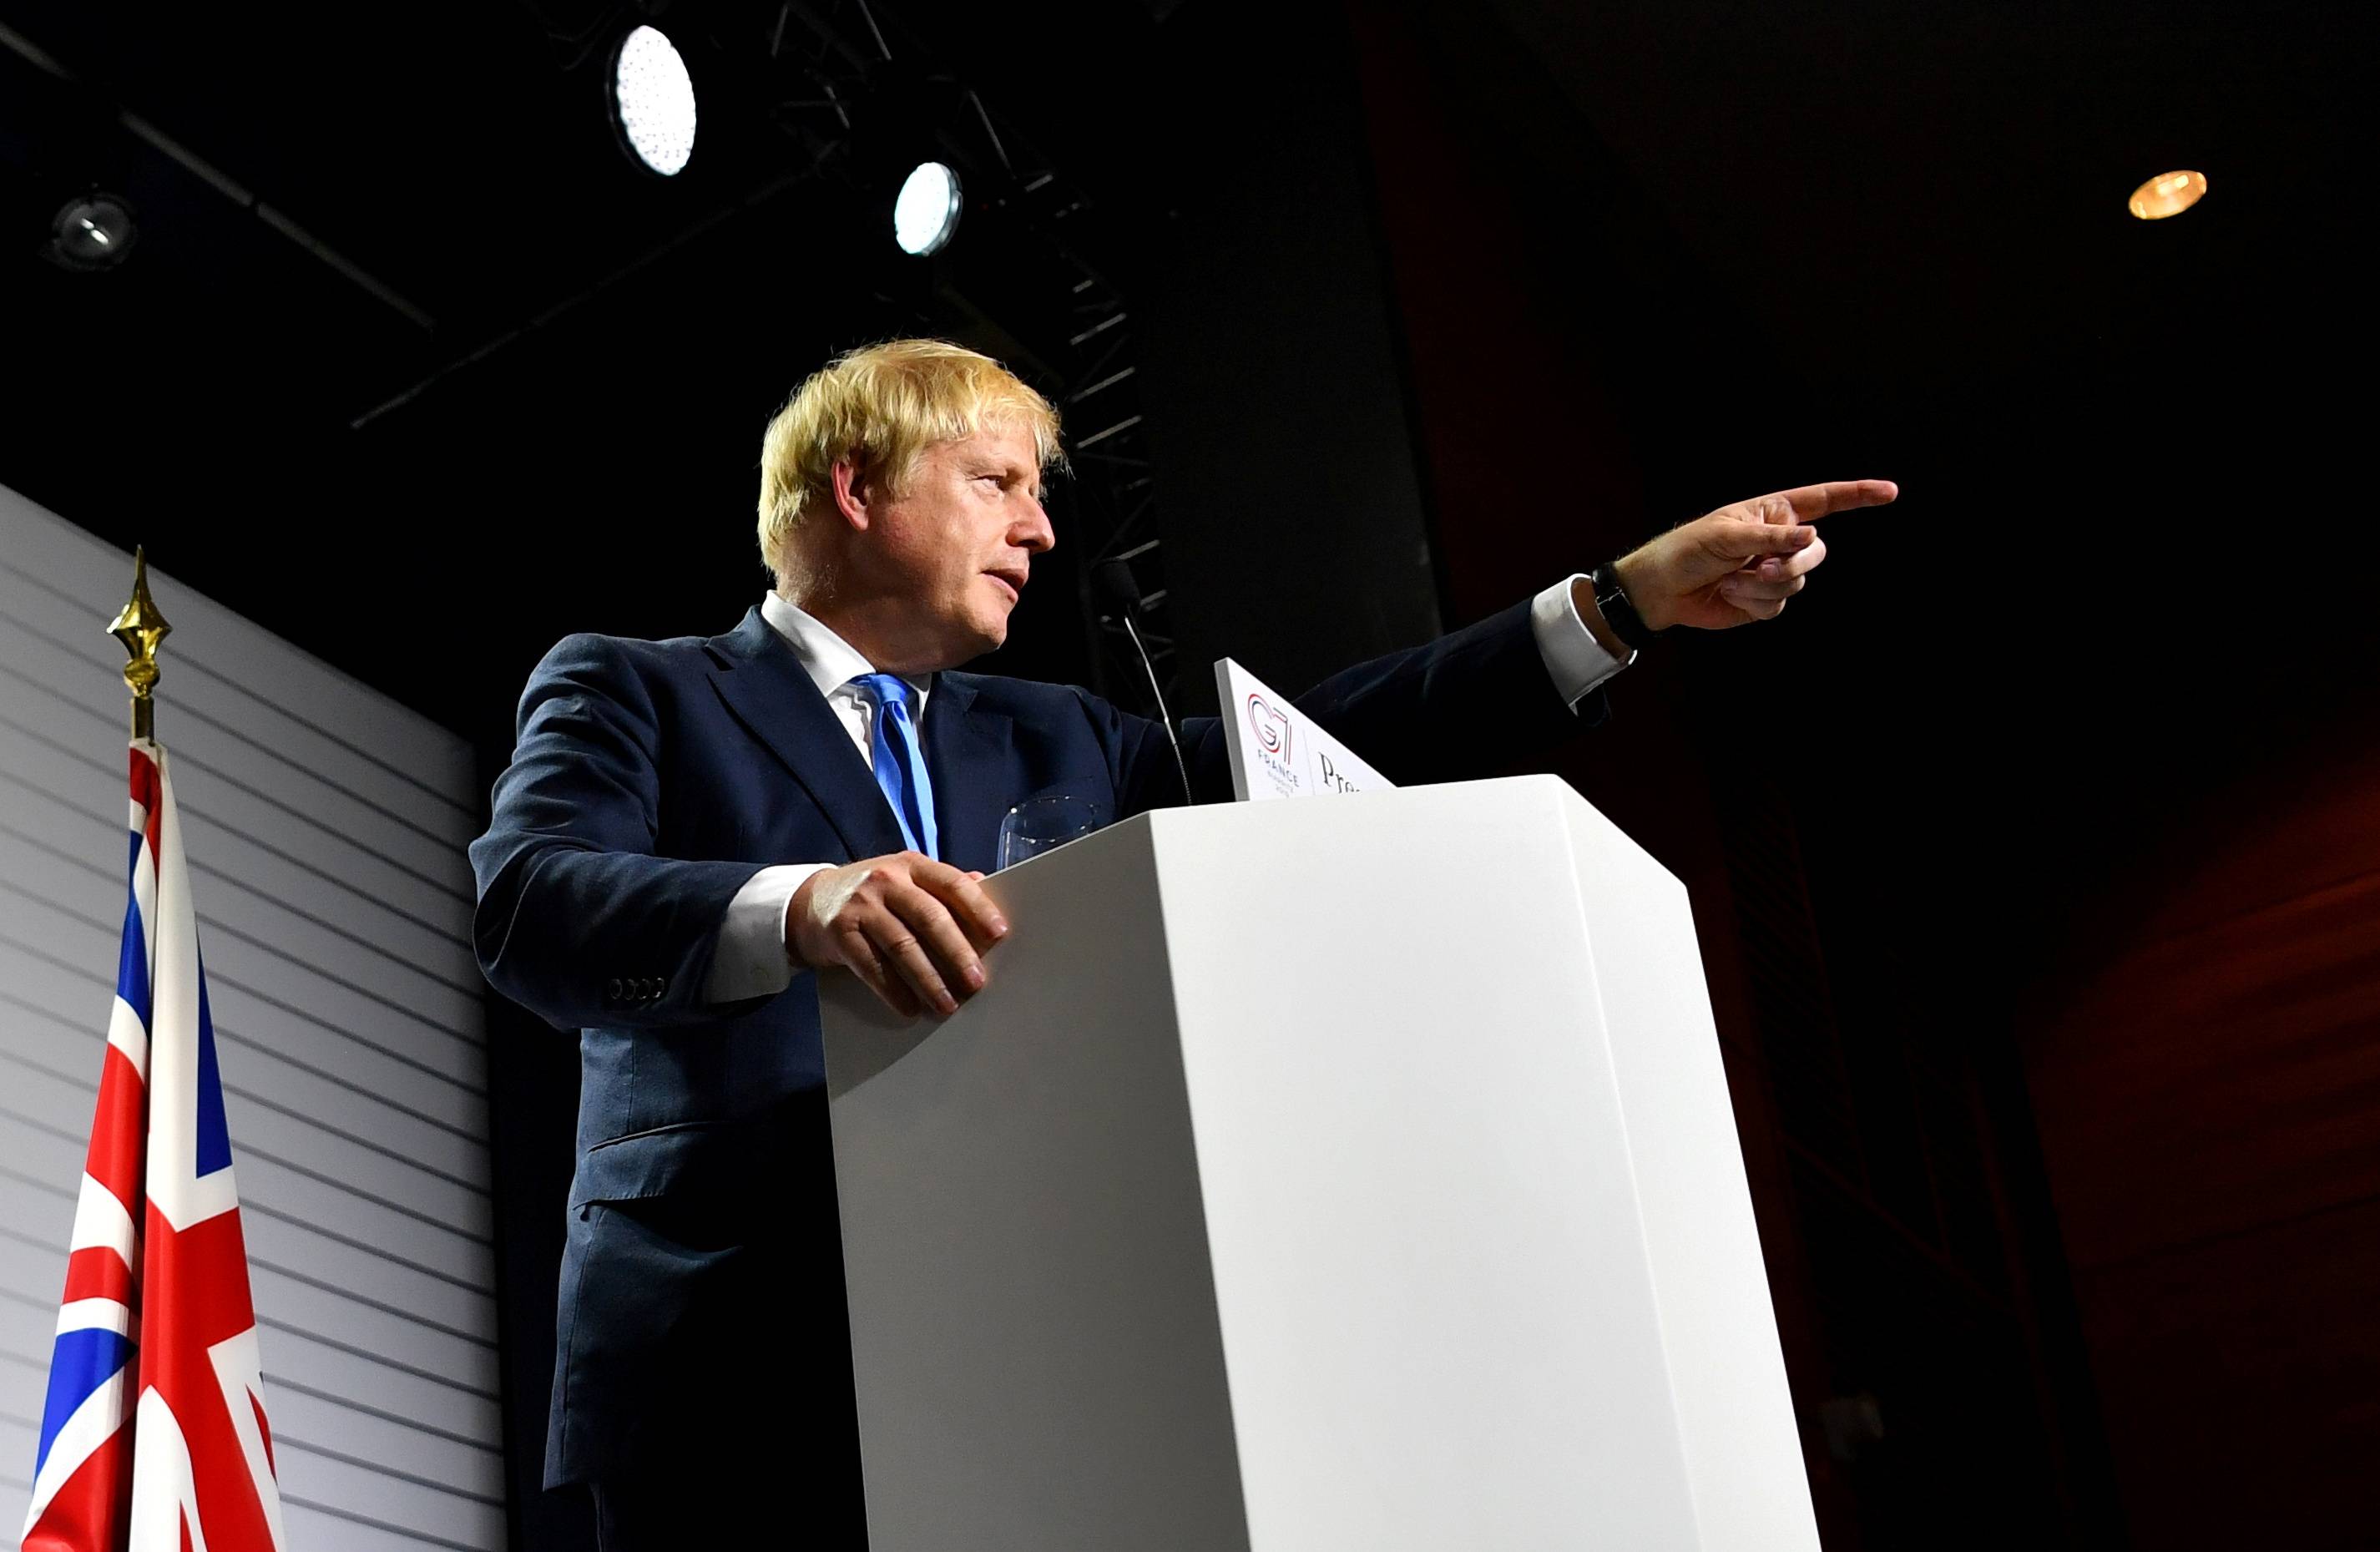 Britain's Prime Minister Boris Johnson speaks at a news conference at the end of the G7 summit in Biarritz, France, in August 2019. The 2021 meeting, due to take place this coming June, will be chaired by Britain. |  REUTERS 